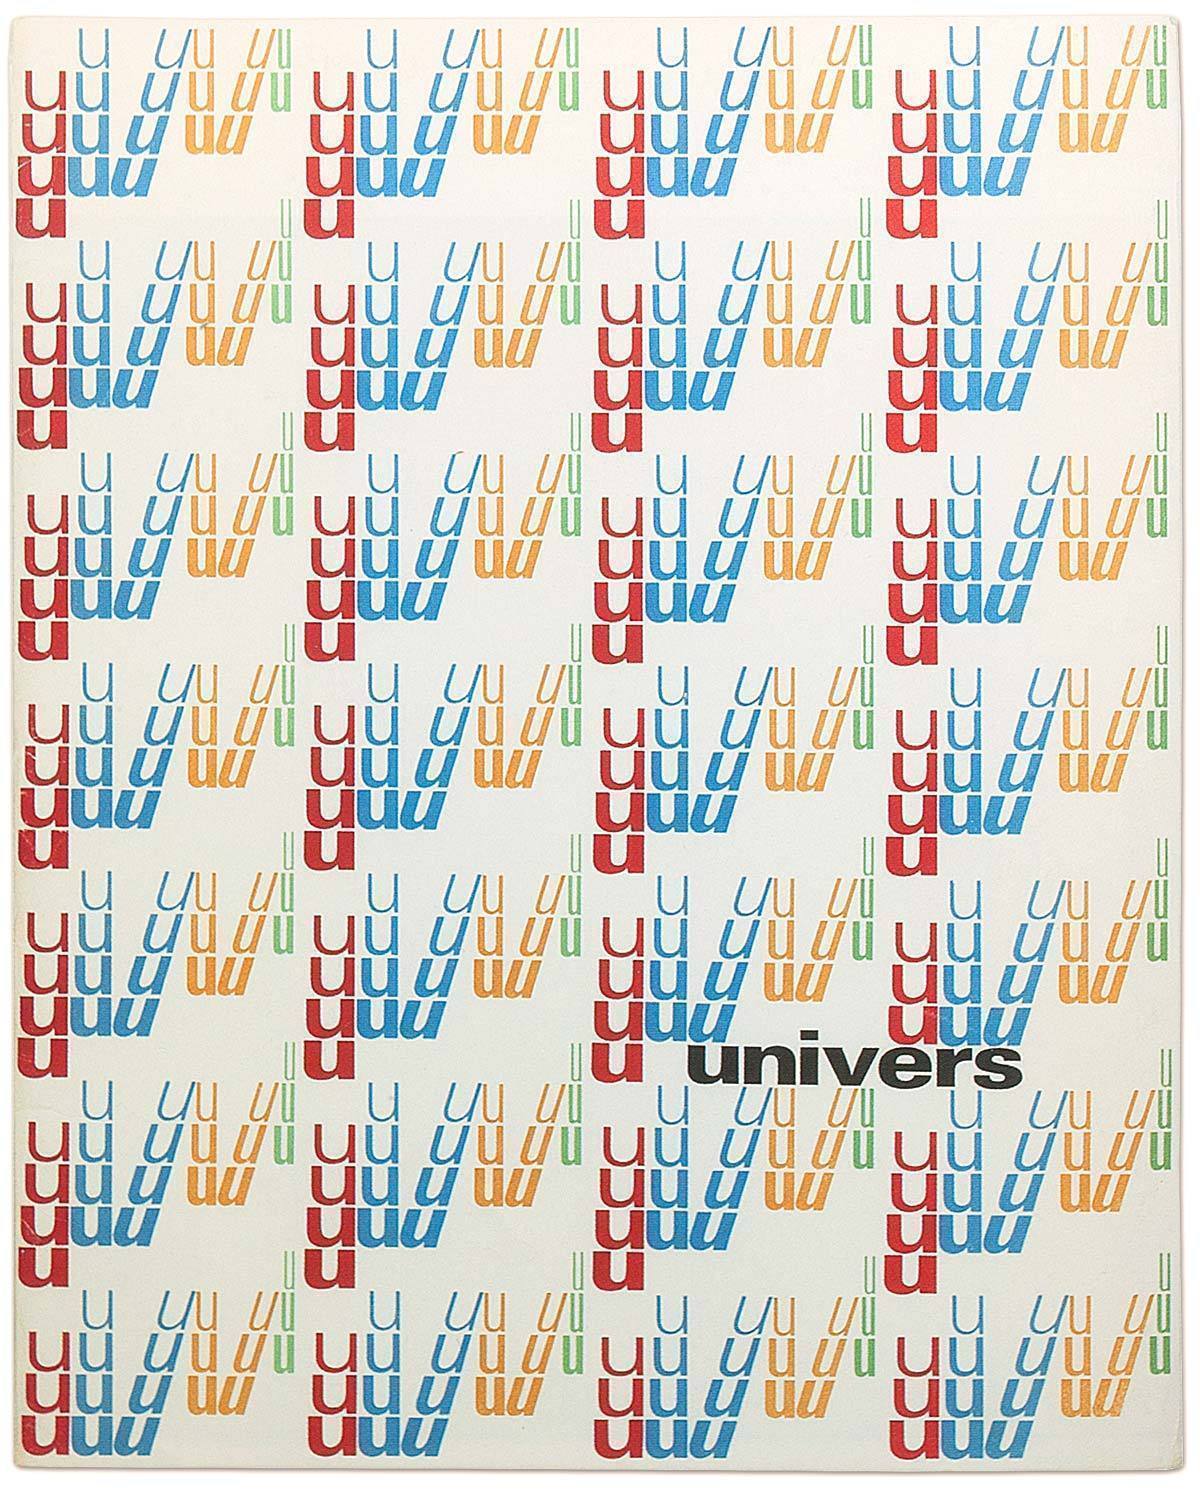 The cover of Deberny & Peignot’s 1964 Univers specimen features a pattern of Bruno Pfäffli’s iconic diagram – a simplified version of Rémy Peignot’s design. (Reproduced from The Book of Books, Cologne 2012, with kind permission of Mathieu Lommen).